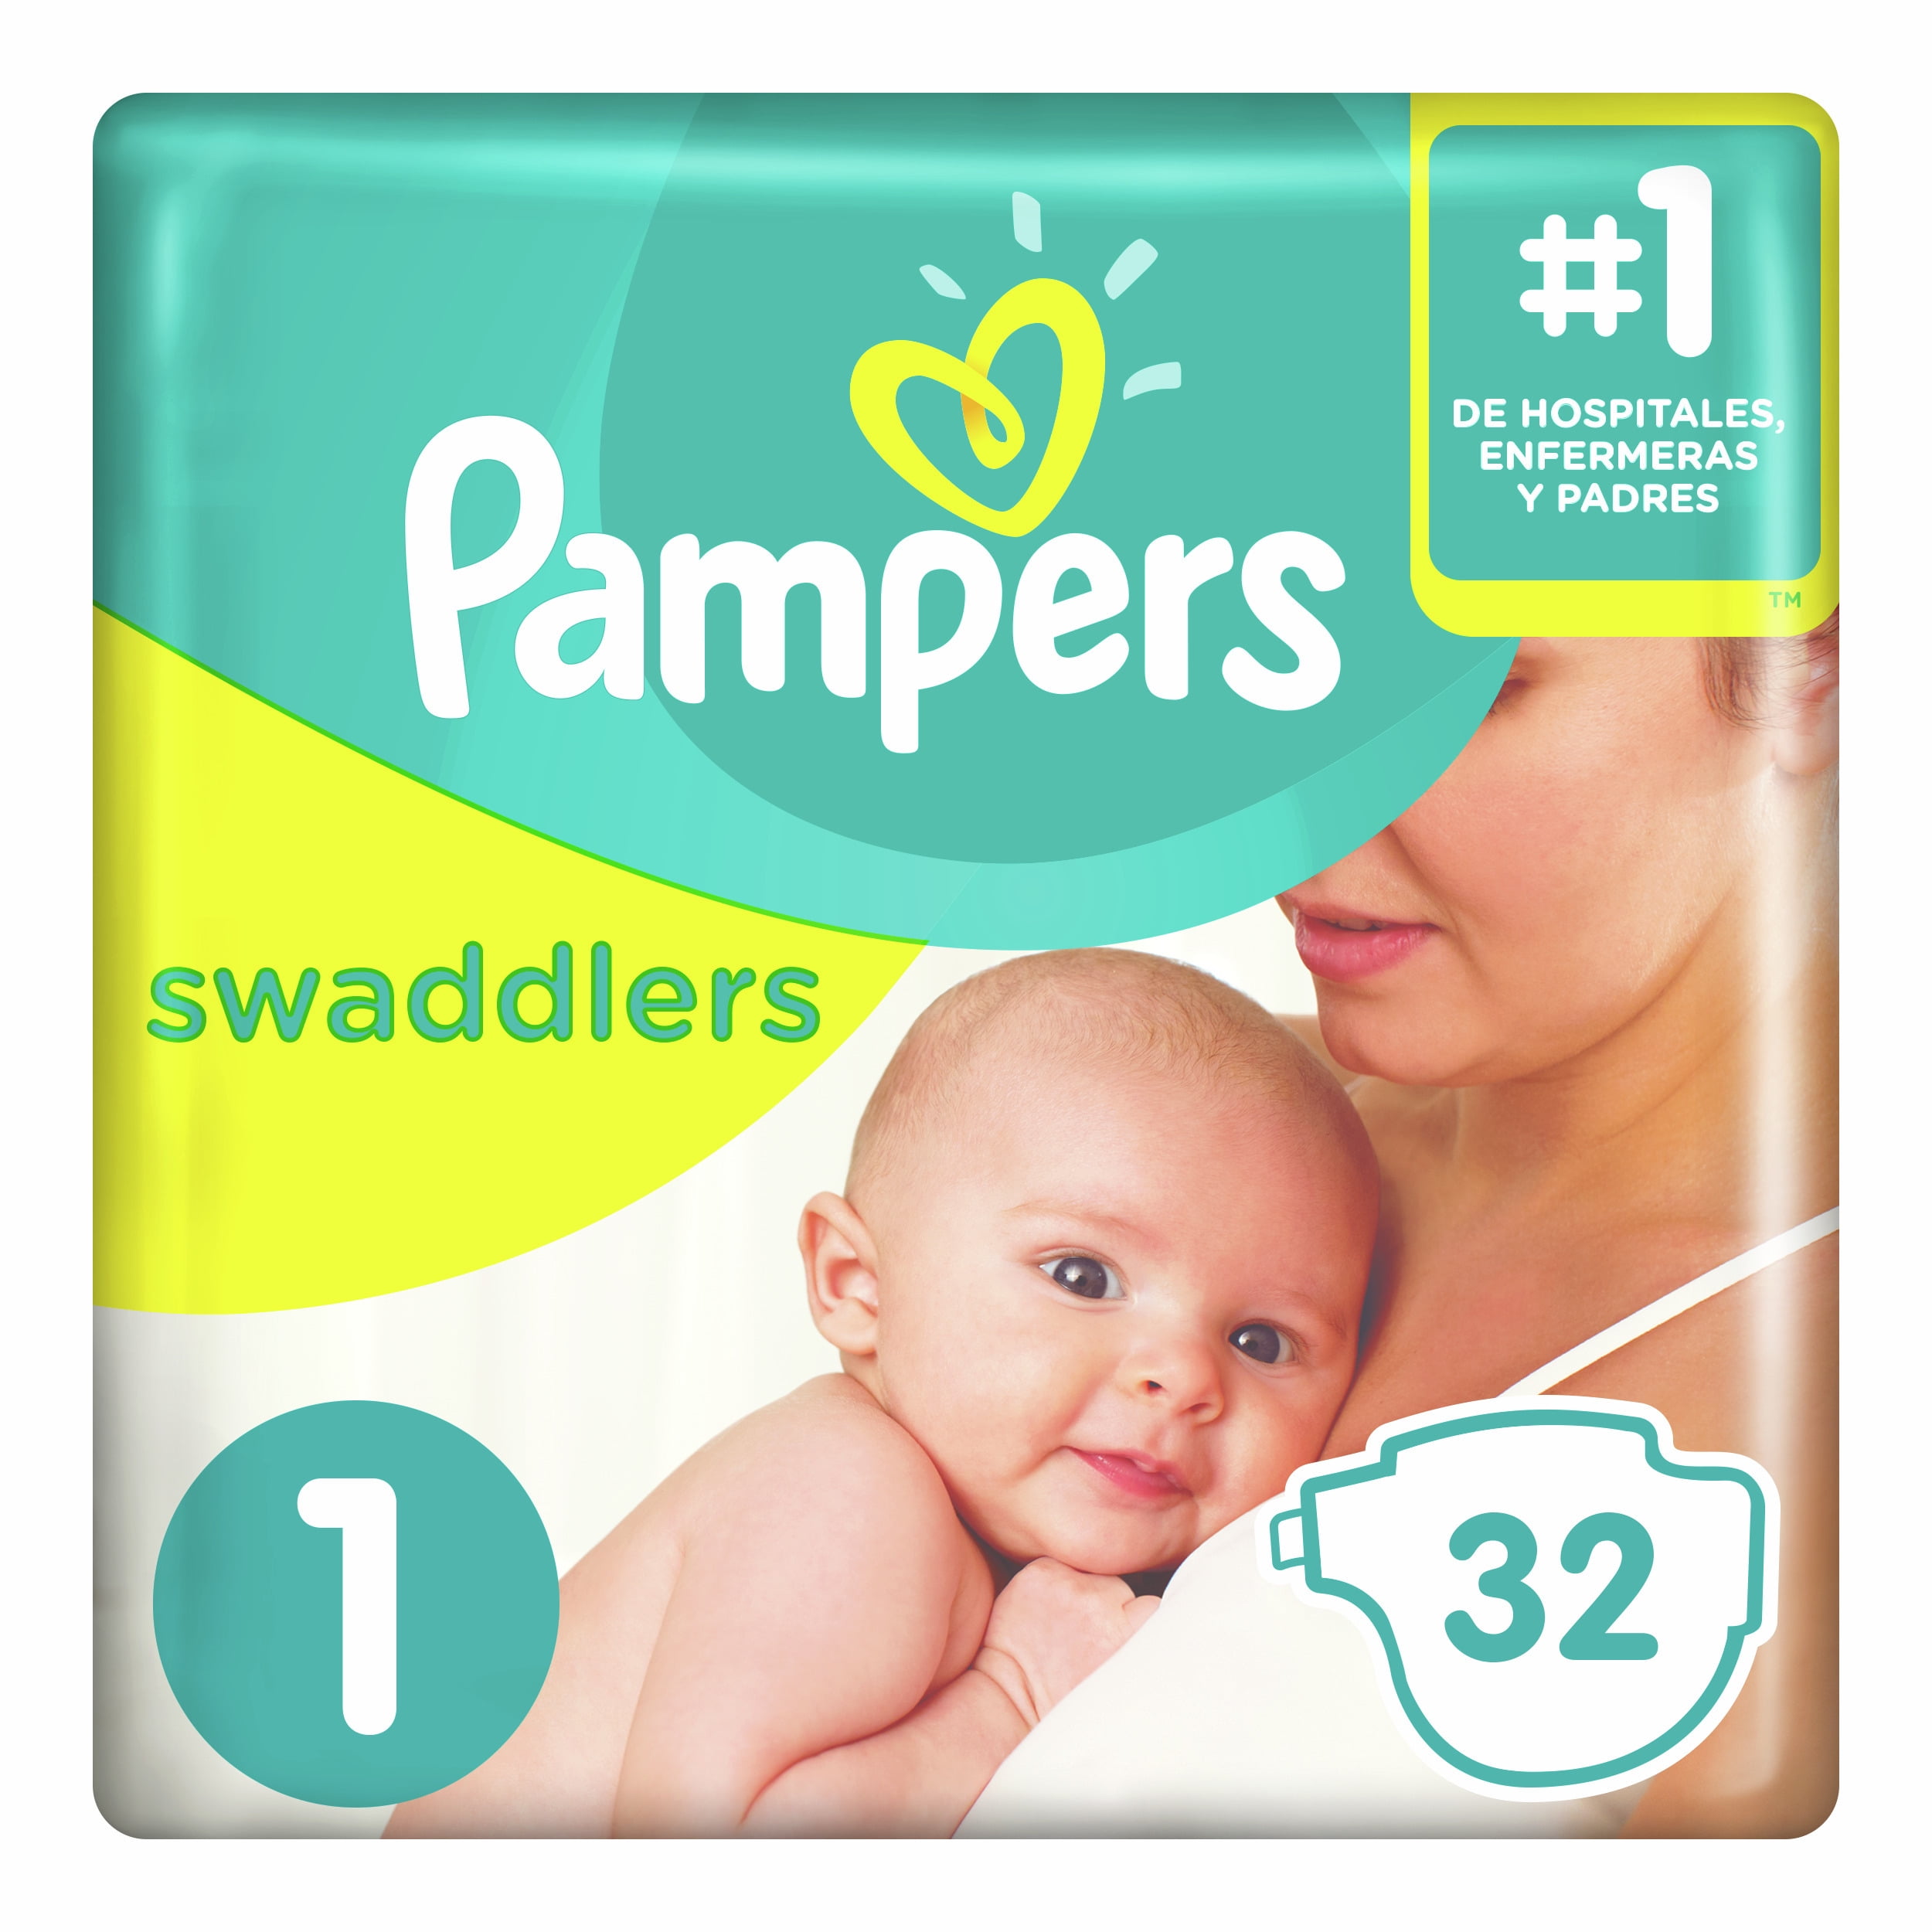 Pampers Swaddlers Newborn Diapers, Size 1 - 32 Count, 2x Softer with  Wetness Indicator & Umbilical Cord Notch